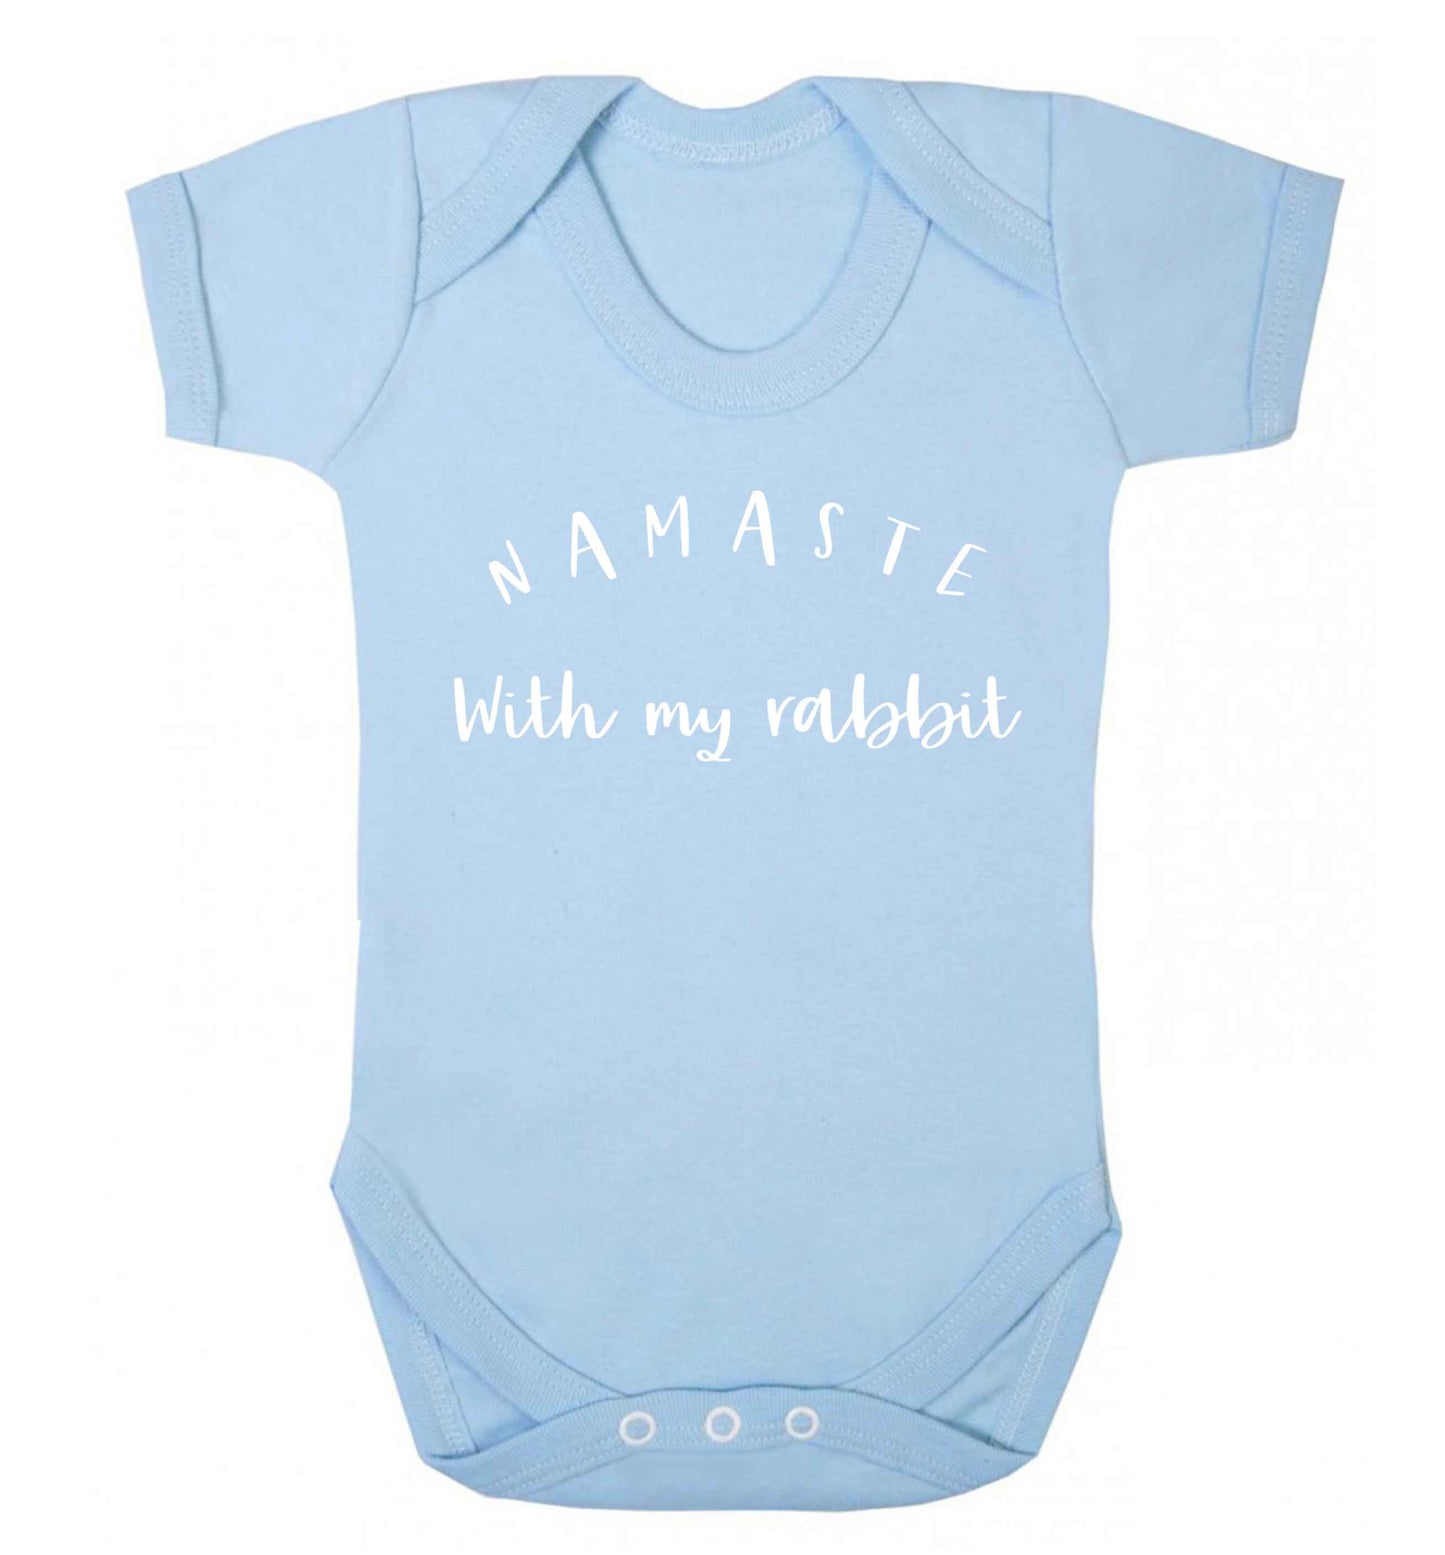 Namaste with my rabbit Baby Vest pale blue 18-24 months